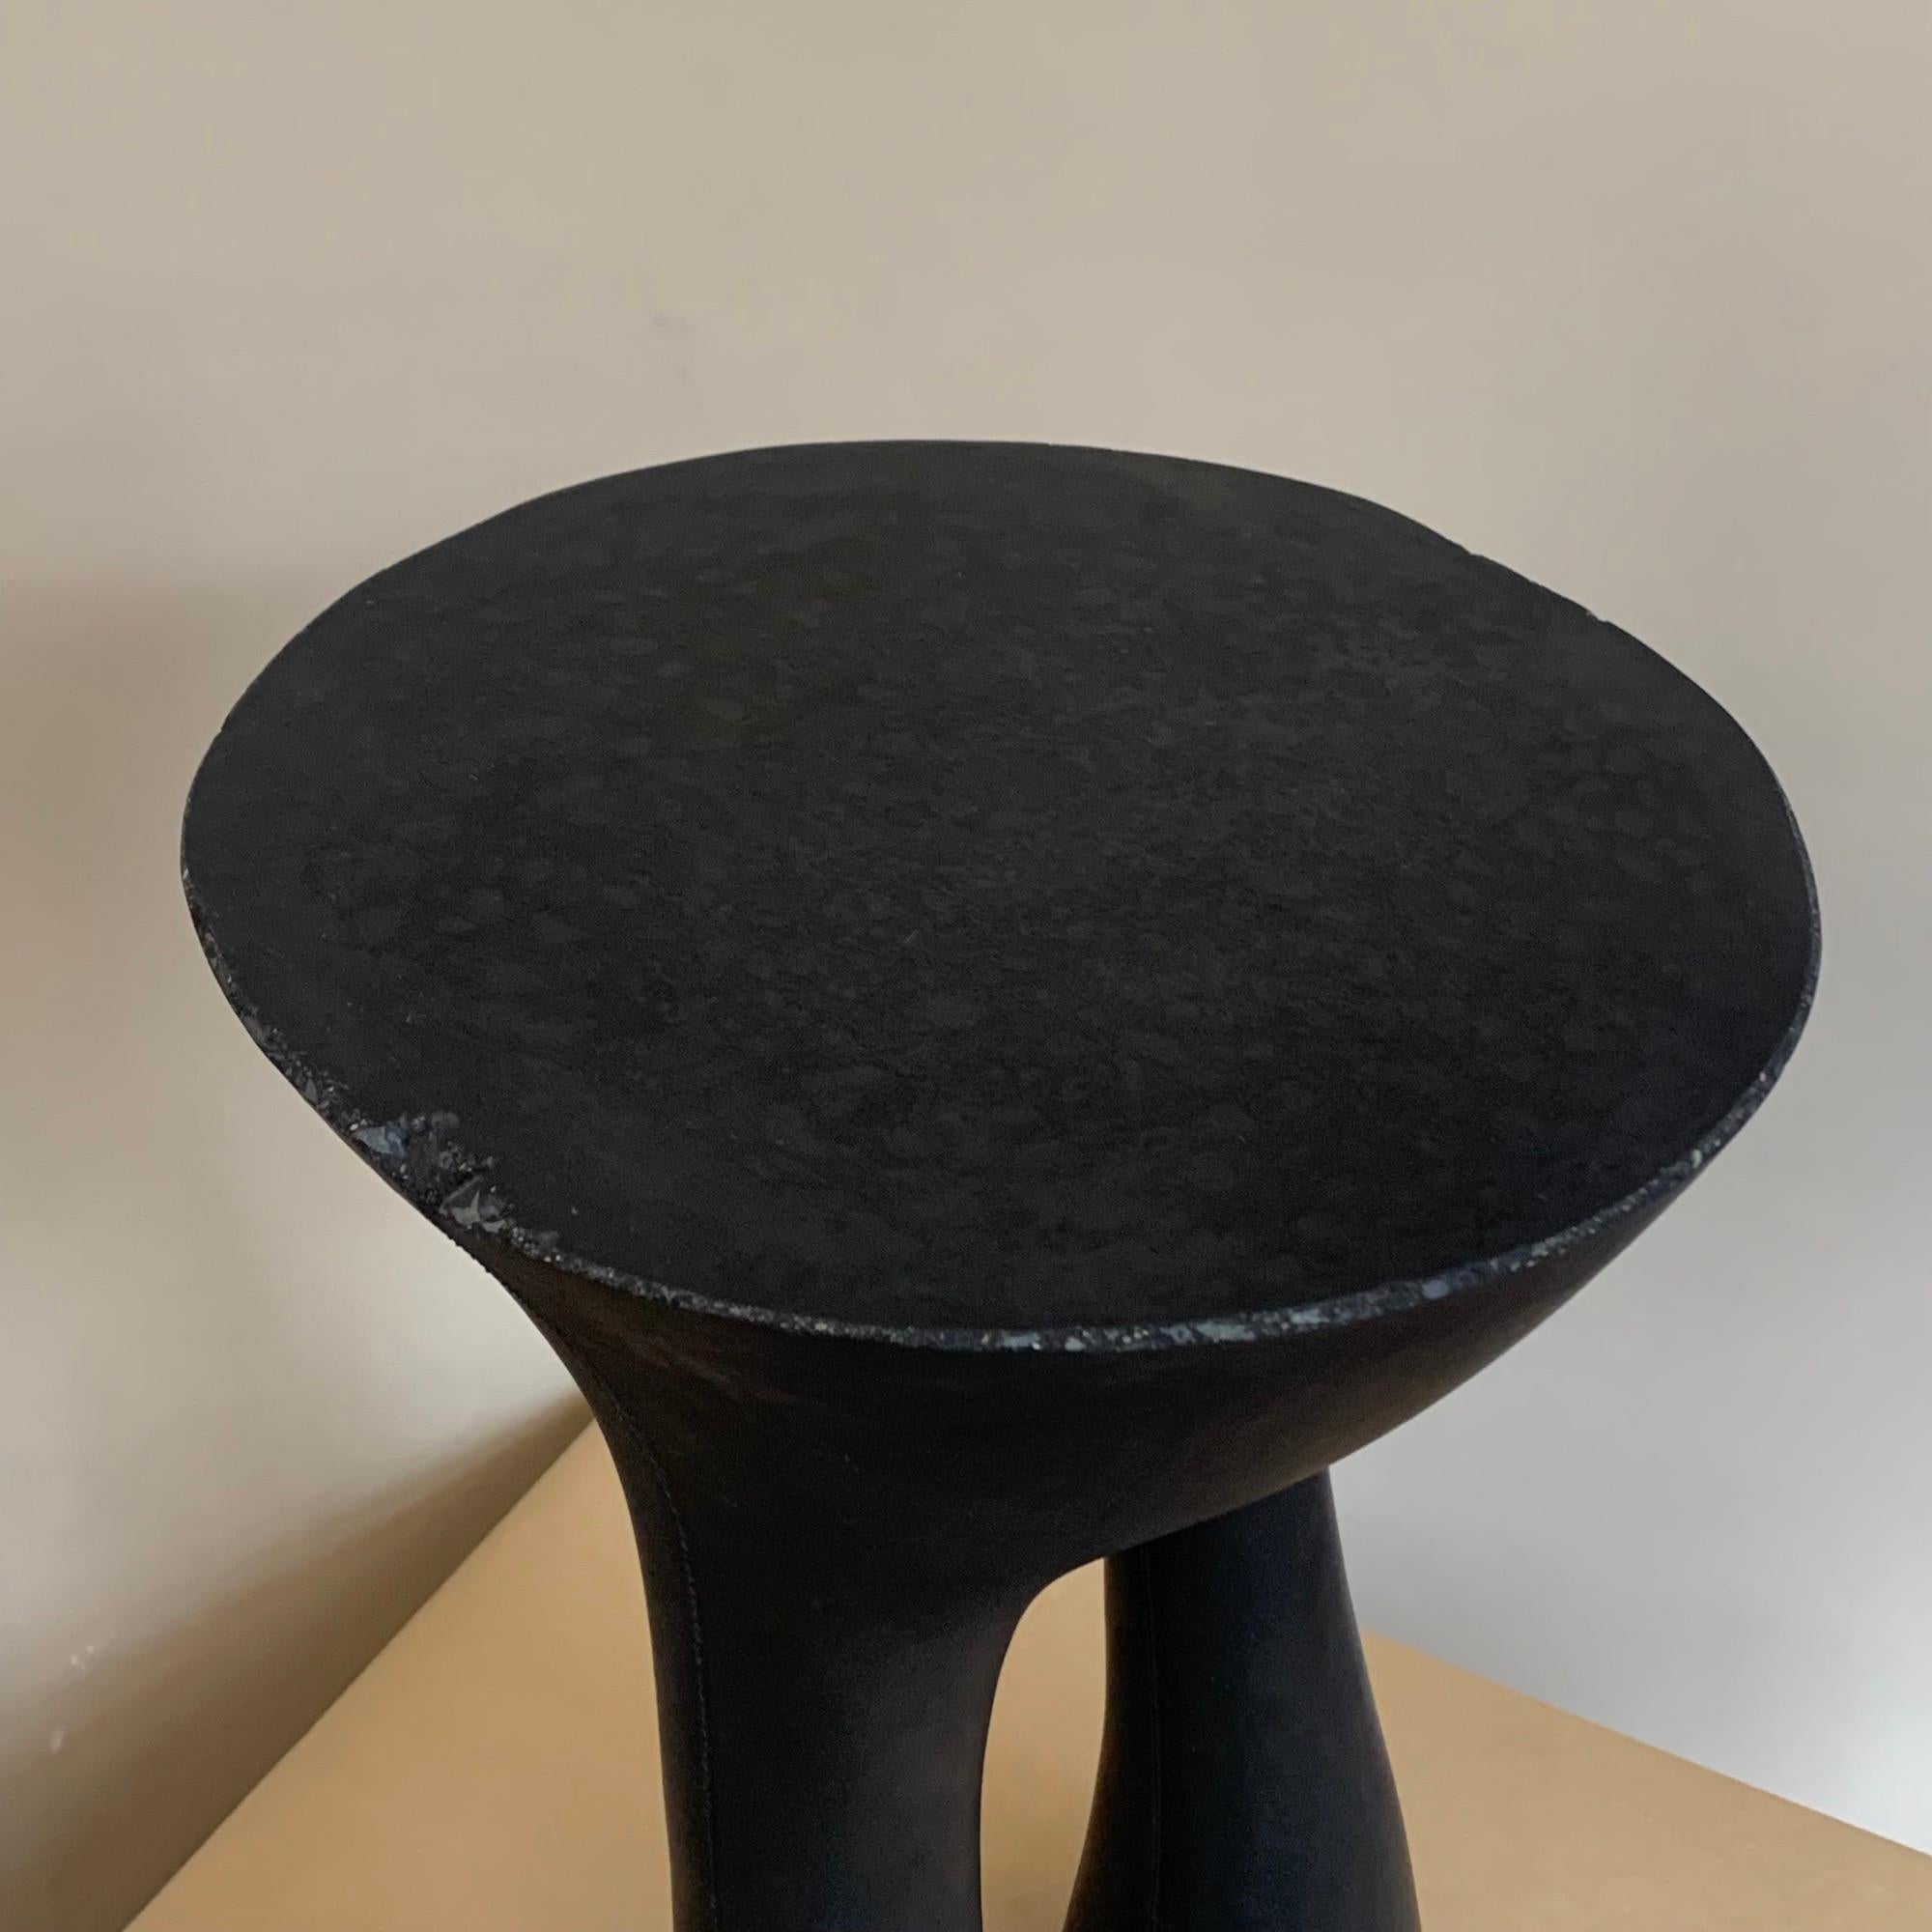 This is a factory 2nd of Souda's Kreten Side Table. There are a few small chips on the top surface. See the pictures for details.